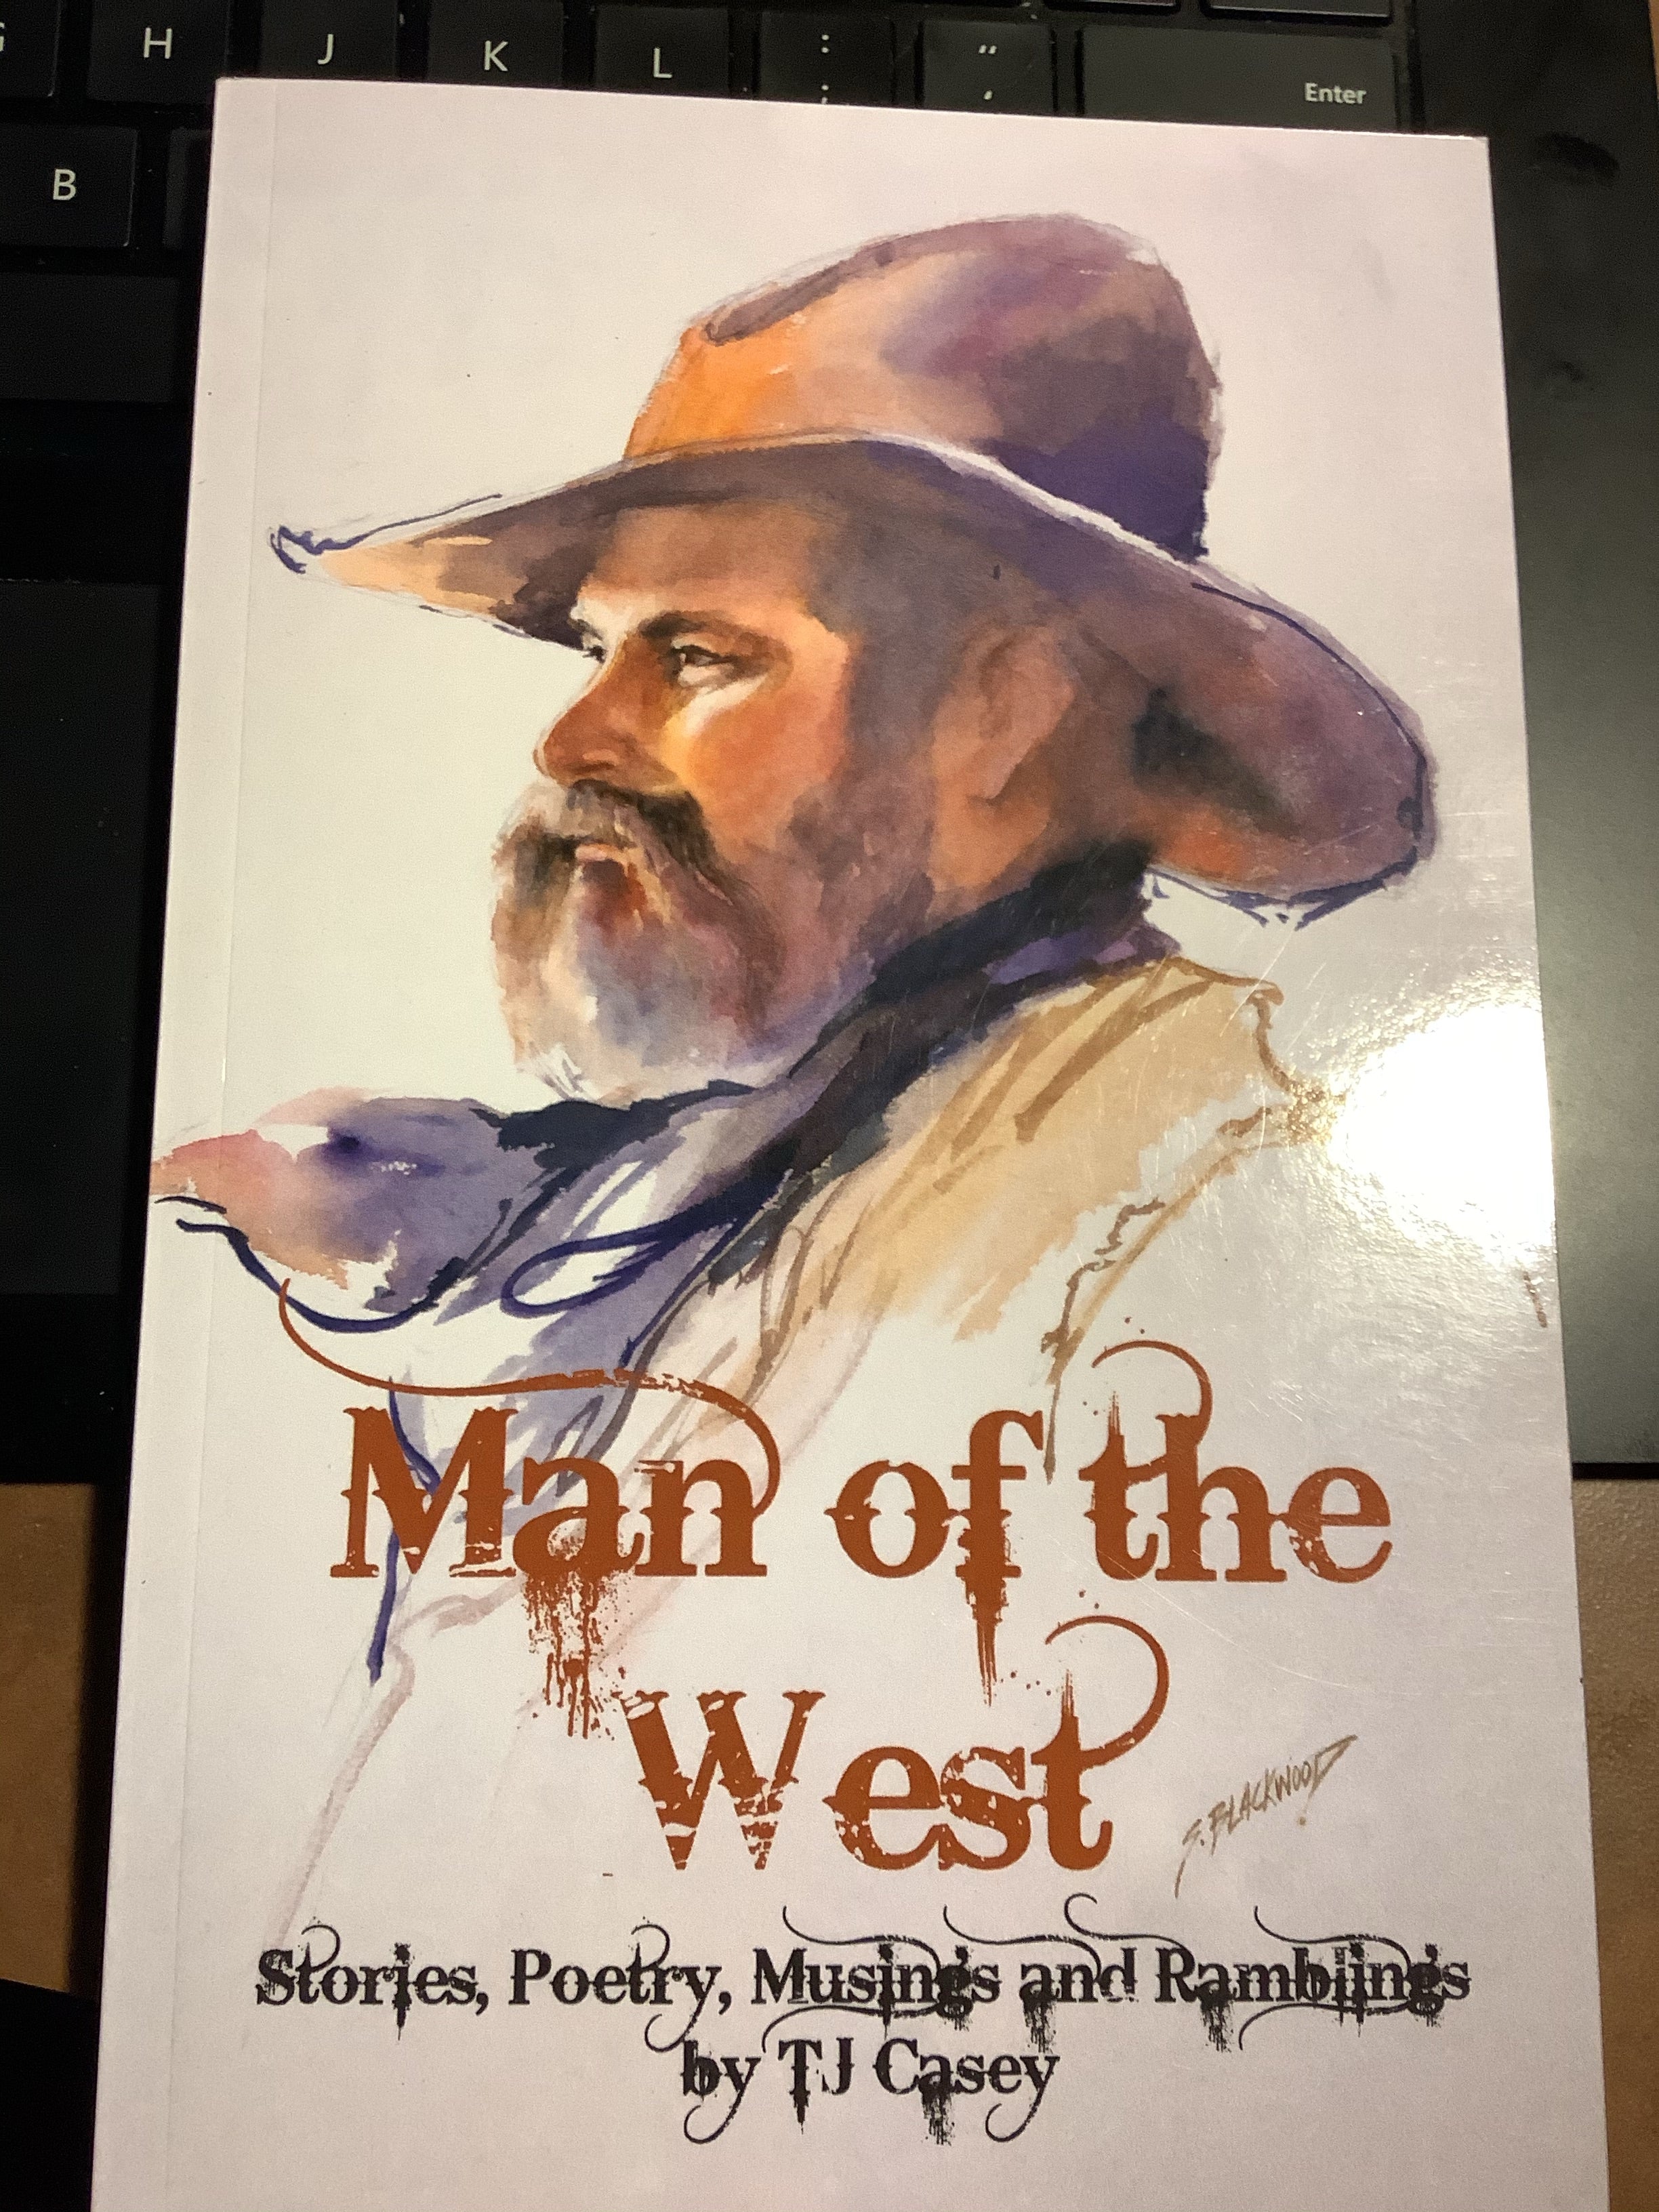 BOOKS - Man of the West - Stories, Poetry, Musings and Ramblings by TJ Casey